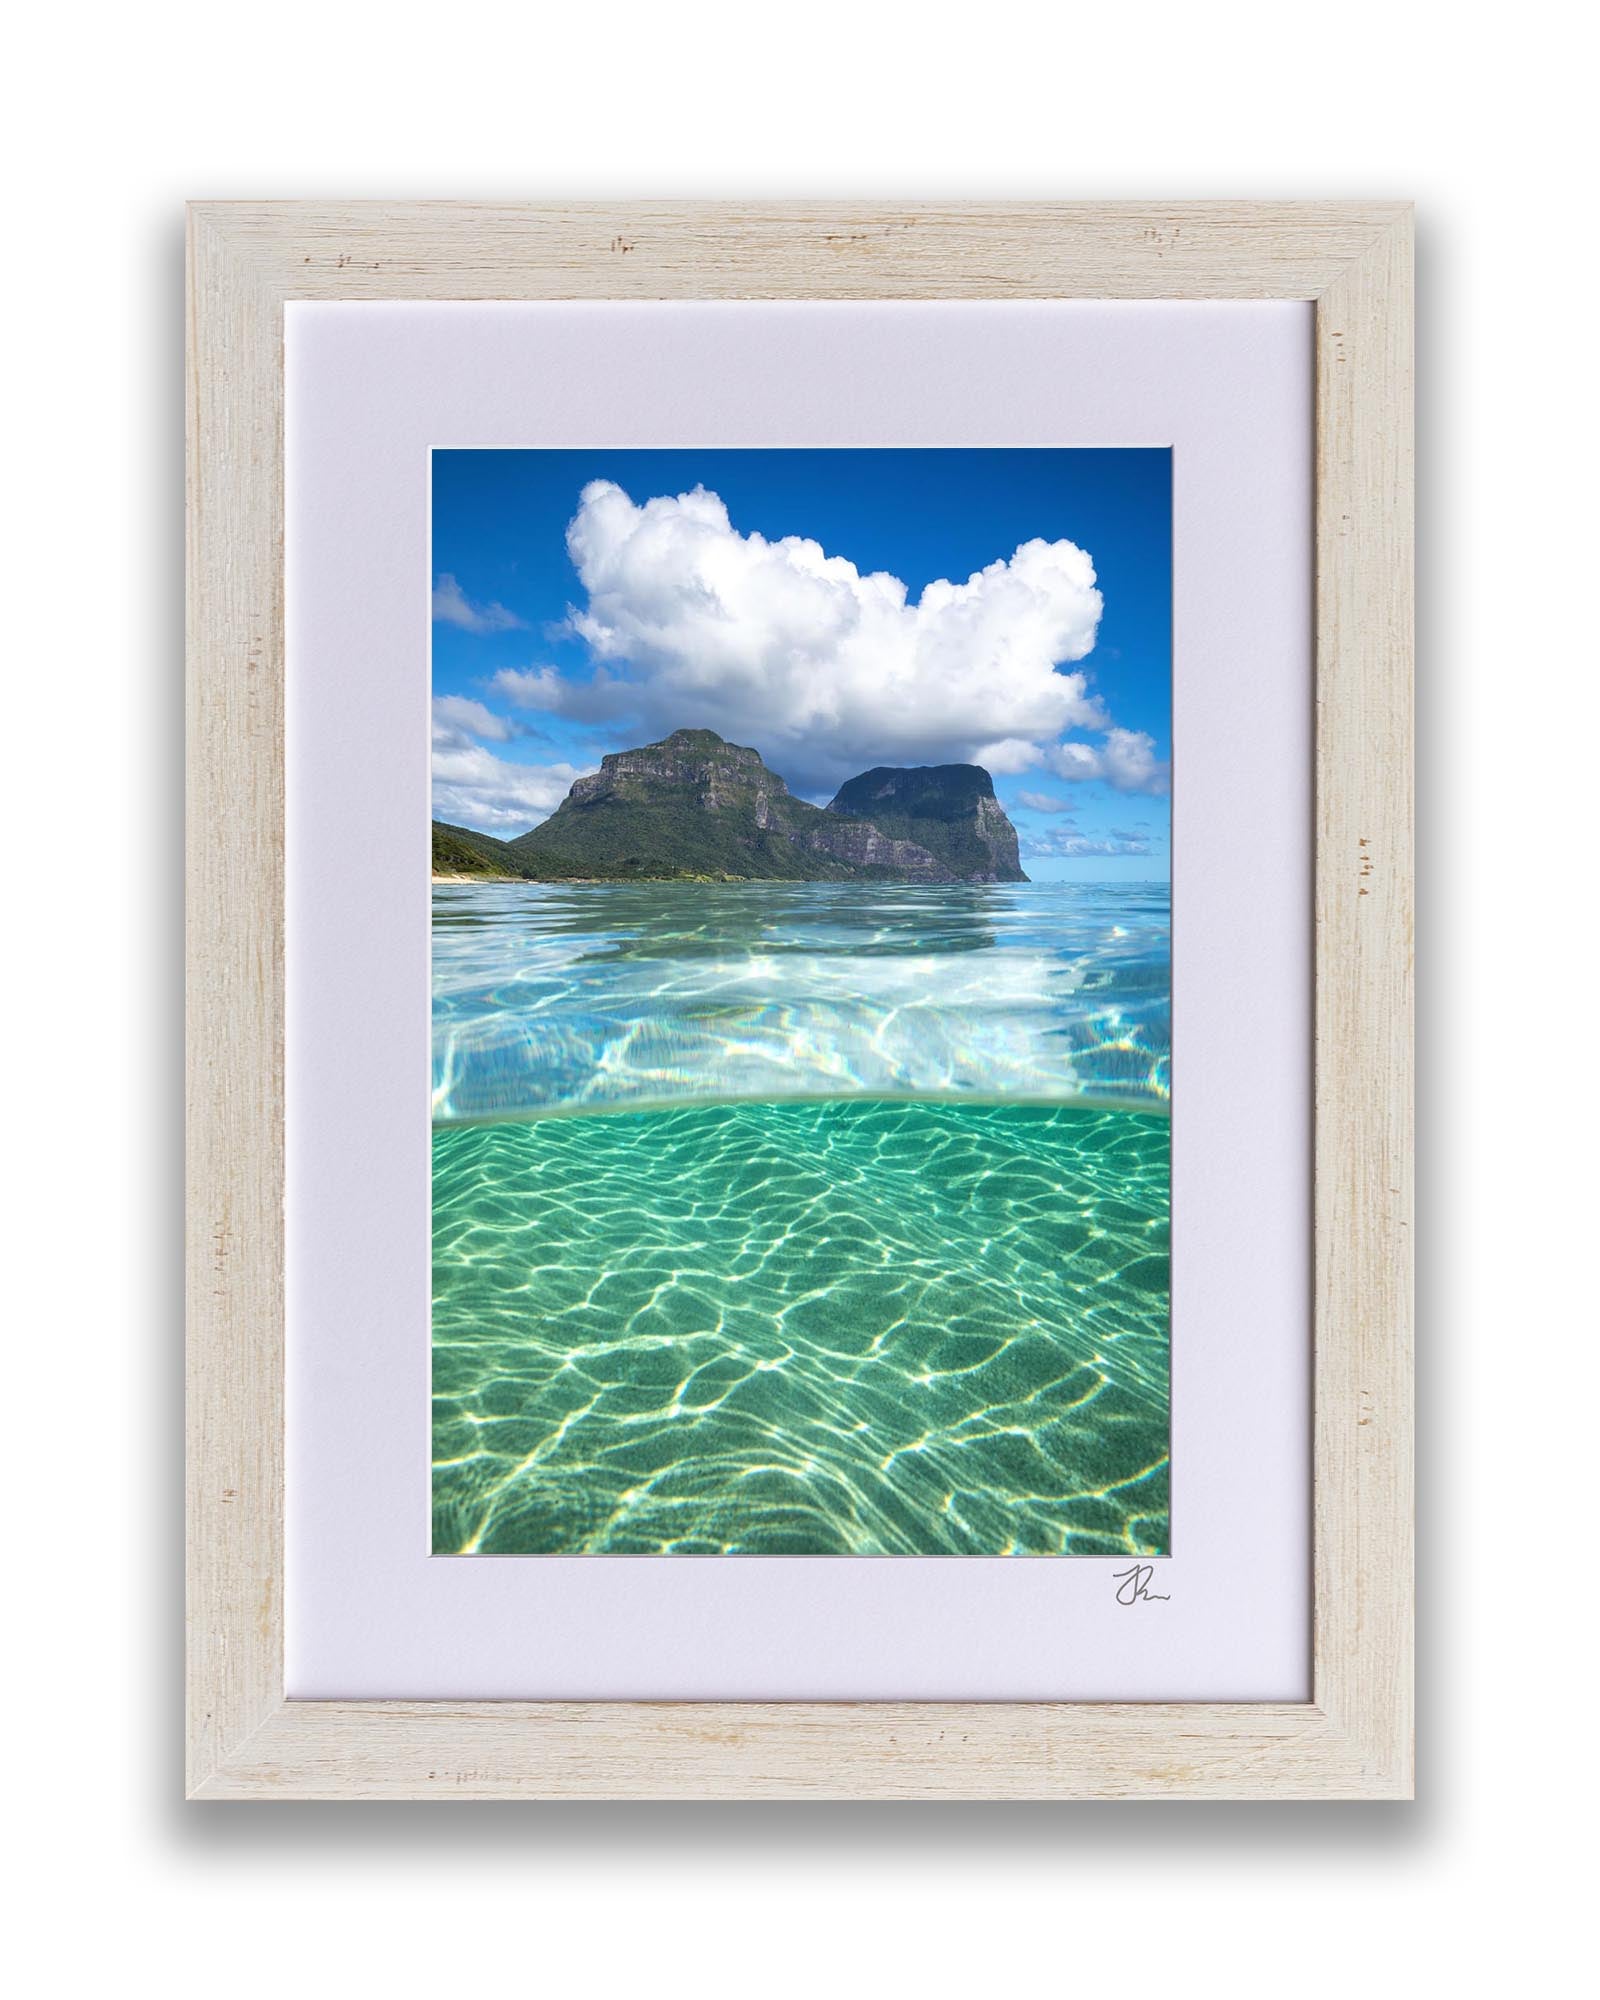 Over Under Lord Howe Island | Vertical